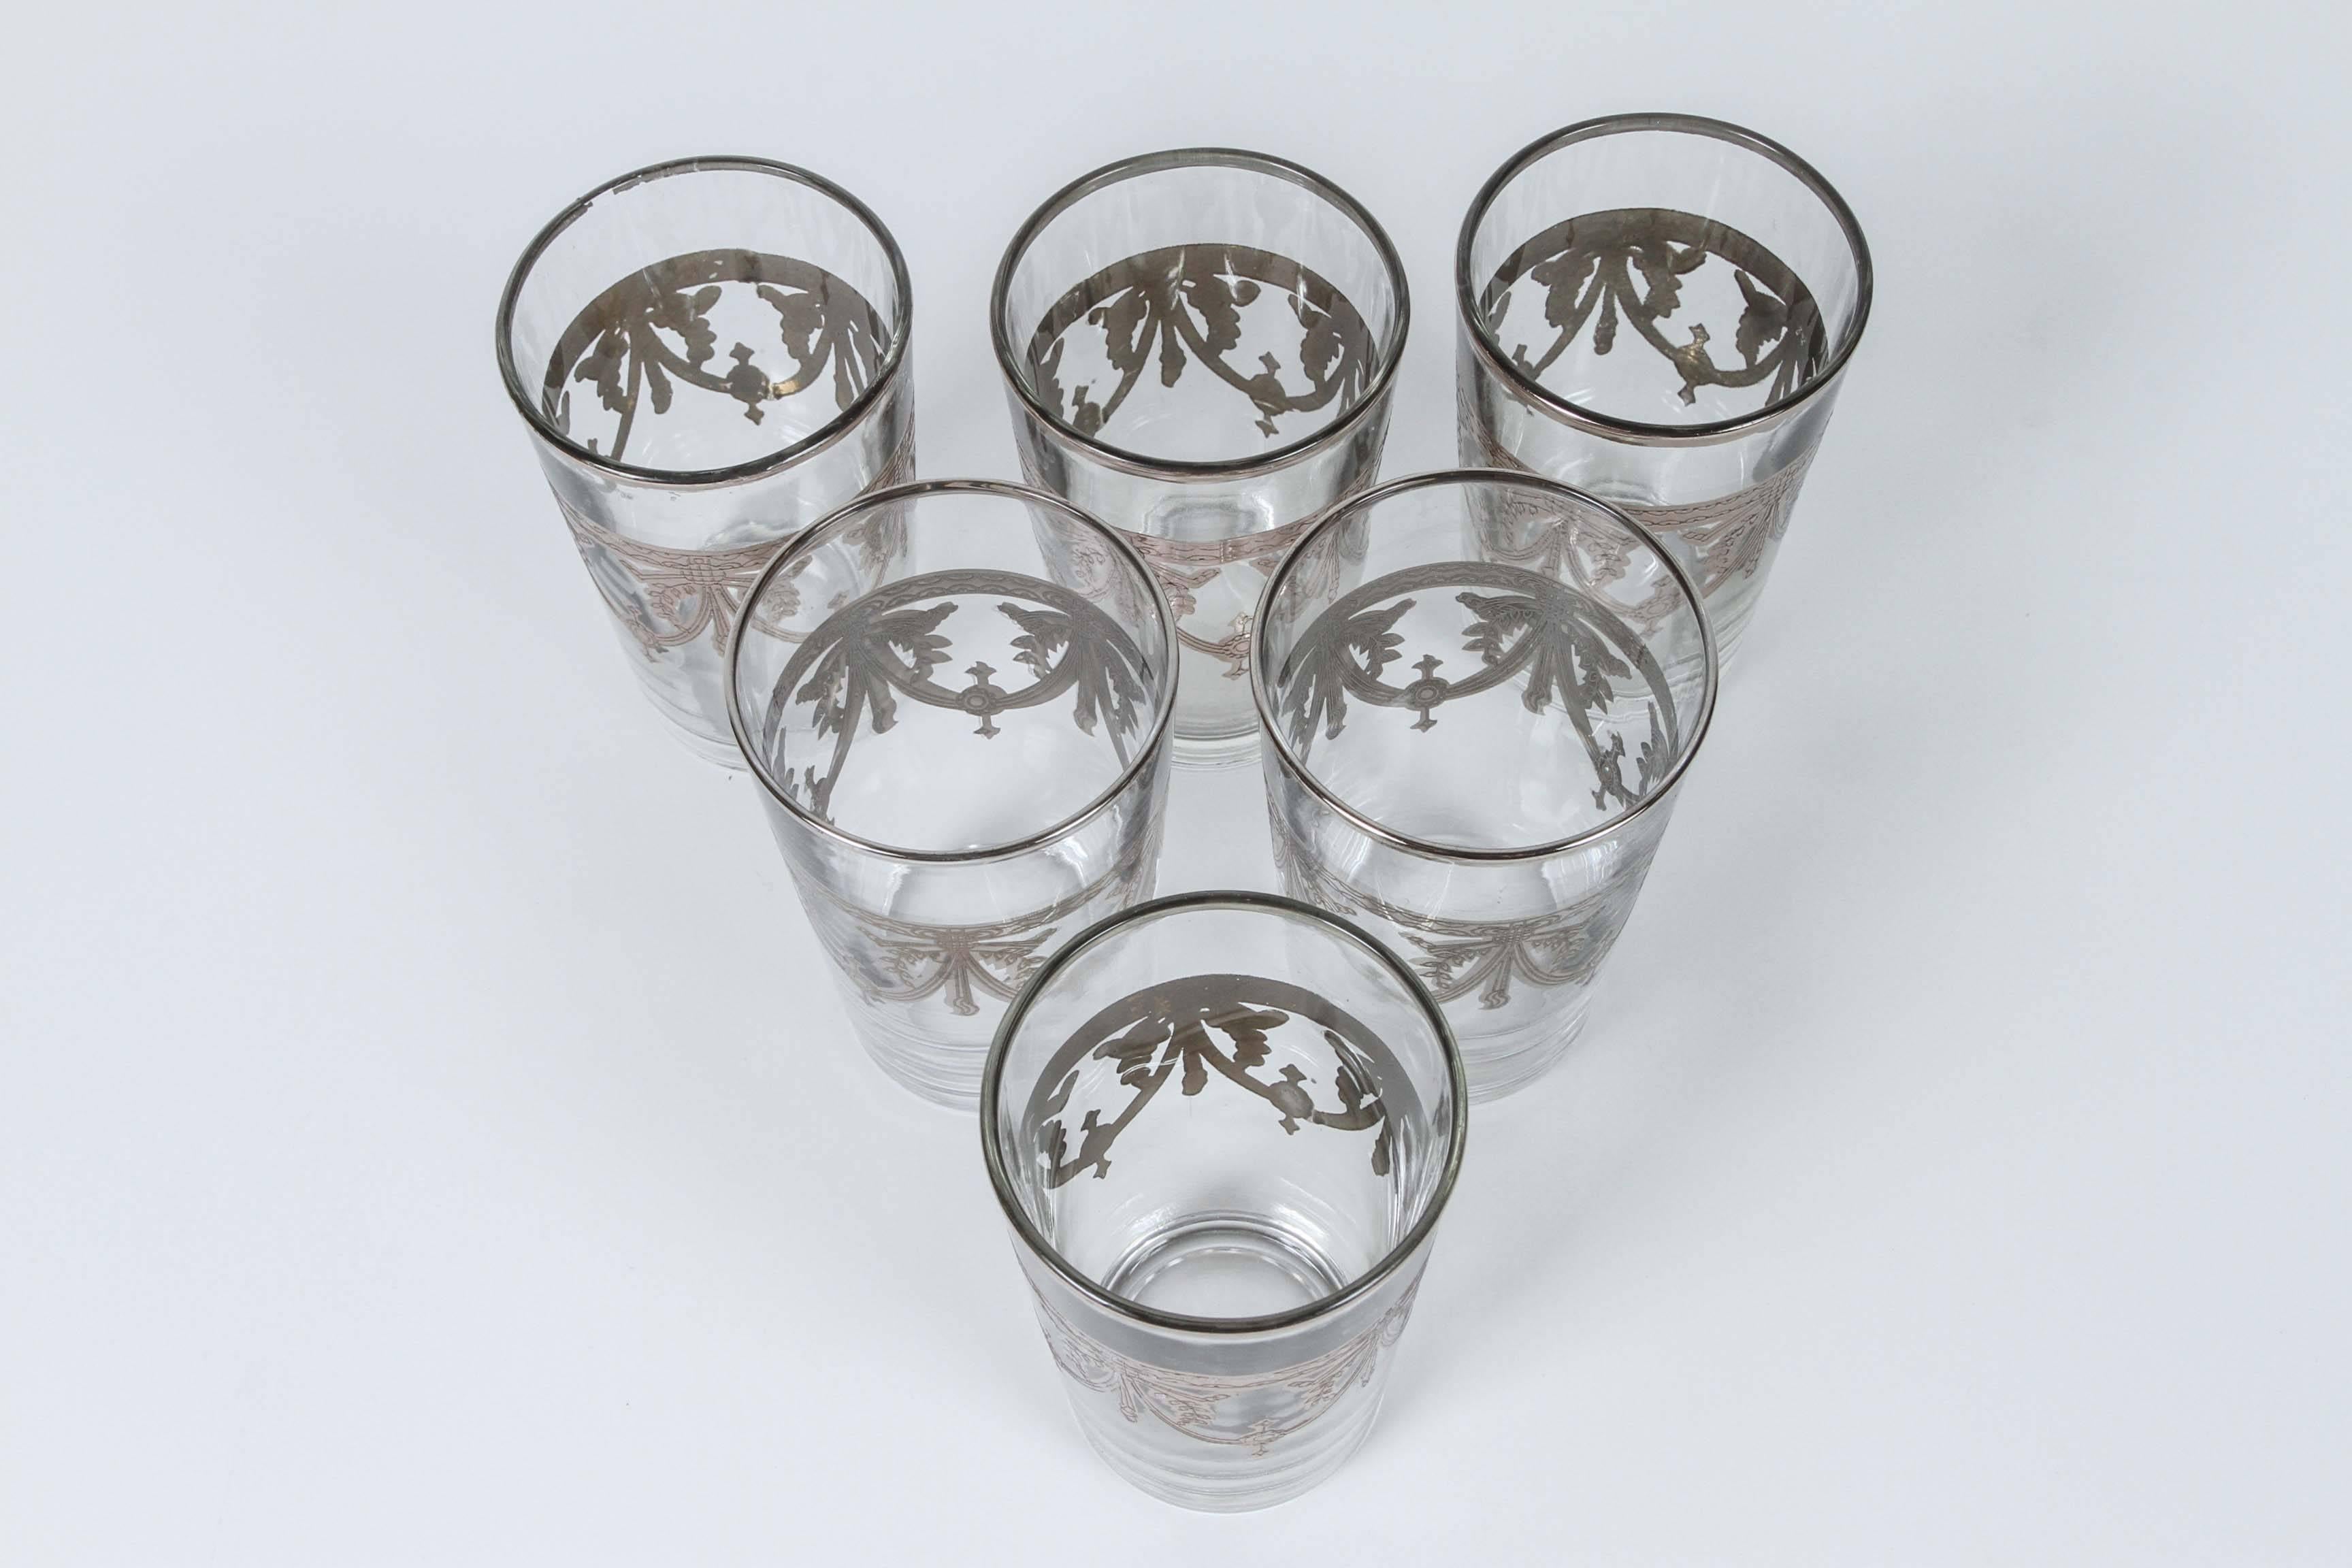 Set of six clear glasses with silver overlay raised Moorish designs.
Decorated with a classical silver pattern overlay frieze.
Use these elegant glasses for Moroccan tea, or any hot or cold drink.
In fantastic condition, perfect for the holidays and